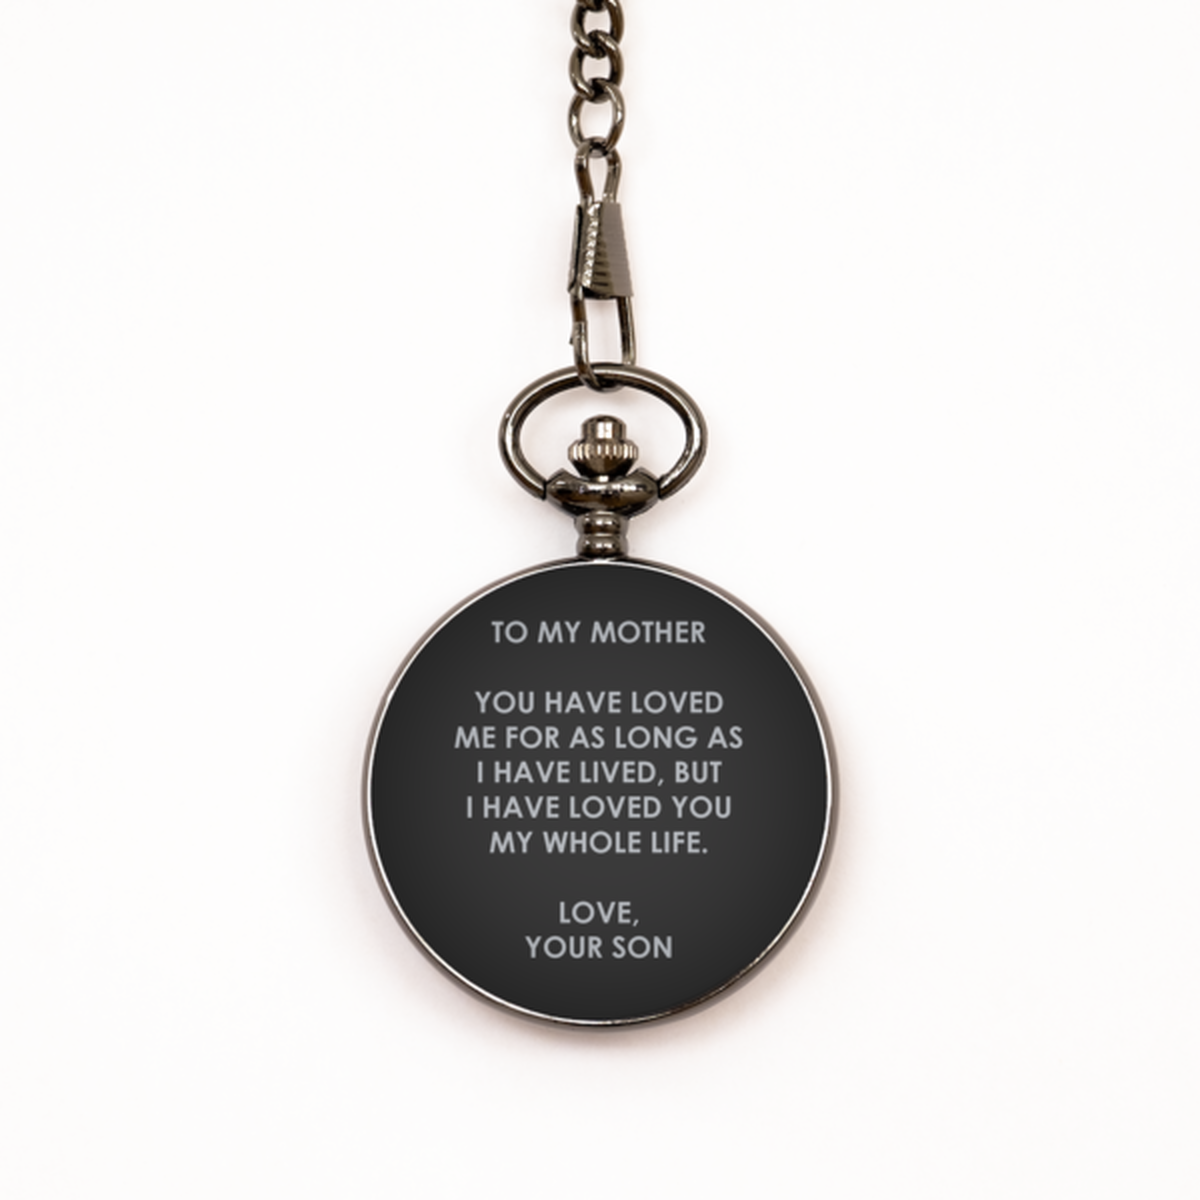 To My Mother  Black Pocket Watch, My Whole Life, Valentines Gifts For Mother From Son, Birthday Gifts For Women